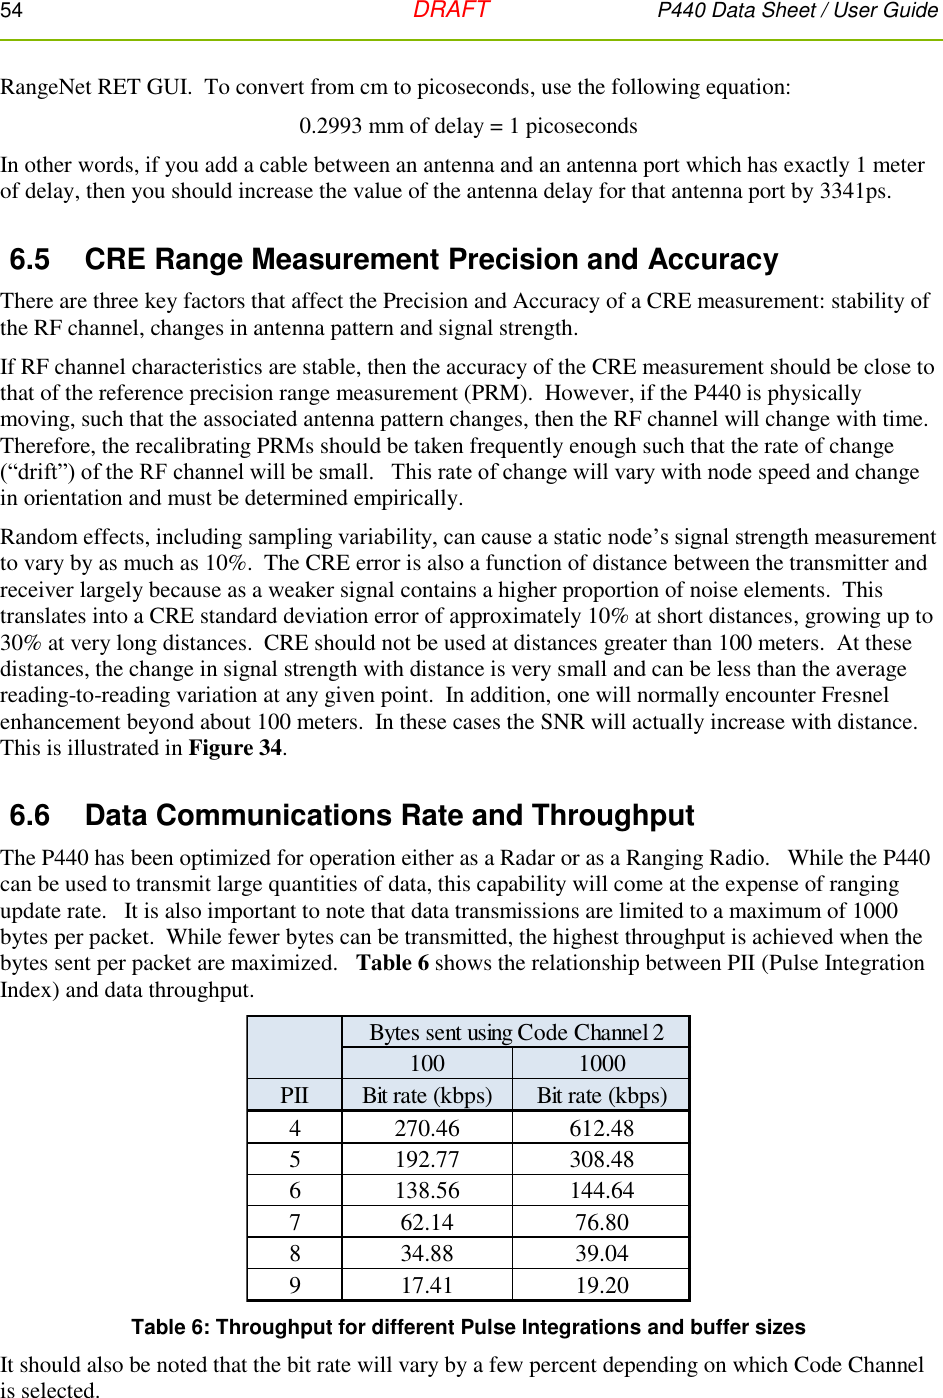 54   DRAFT P440 Data Sheet / User Guide  RangeNet RET GUI.  To convert from cm to picoseconds, use the following equation: 0.2993 mm of delay = 1 picoseconds In other words, if you add a cable between an antenna and an antenna port which has exactly 1 meter of delay, then you should increase the value of the antenna delay for that antenna port by 3341ps. 6.5  CRE Range Measurement Precision and Accuracy There are three key factors that affect the Precision and Accuracy of a CRE measurement: stability of the RF channel, changes in antenna pattern and signal strength.  If RF channel characteristics are stable, then the accuracy of the CRE measurement should be close to that of the reference precision range measurement (PRM).  However, if the P440 is physically moving, such that the associated antenna pattern changes, then the RF channel will change with time.  Therefore, the recalibrating PRMs should be taken frequently enough such that the rate of change (“drift”) of the RF channel will be small.   This rate of change will vary with node speed and change in orientation and must be determined empirically.  Random effects, including sampling variability, can cause a static node’s signal strength measurement to vary by as much as 10%.  The CRE error is also a function of distance between the transmitter and receiver largely because as a weaker signal contains a higher proportion of noise elements.  This translates into a CRE standard deviation error of approximately 10% at short distances, growing up to 30% at very long distances.  CRE should not be used at distances greater than 100 meters.  At these distances, the change in signal strength with distance is very small and can be less than the average reading-to-reading variation at any given point.  In addition, one will normally encounter Fresnel enhancement beyond about 100 meters.  In these cases the SNR will actually increase with distance. This is illustrated in Figure 34. 6.6  Data Communications Rate and Throughput The P440 has been optimized for operation either as a Radar or as a Ranging Radio.   While the P440 can be used to transmit large quantities of data, this capability will come at the expense of ranging update rate.   It is also important to note that data transmissions are limited to a maximum of 1000 bytes per packet.  While fewer bytes can be transmitted, the highest throughput is achieved when the bytes sent per packet are maximized.   Table 6 shows the relationship between PII (Pulse Integration Index) and data throughput.    Table 6: Throughput for different Pulse Integrations and buffer sizes It should also be noted that the bit rate will vary by a few percent depending on which Code Channel is selected.     Bytes sent using Code Channel 2100 1000PII Bit rate (kbps) Bit rate (kbps)4270.46 612.485192.77 308.486138.56 144.64762.14 76.80834.88 39.04917.41 19.20